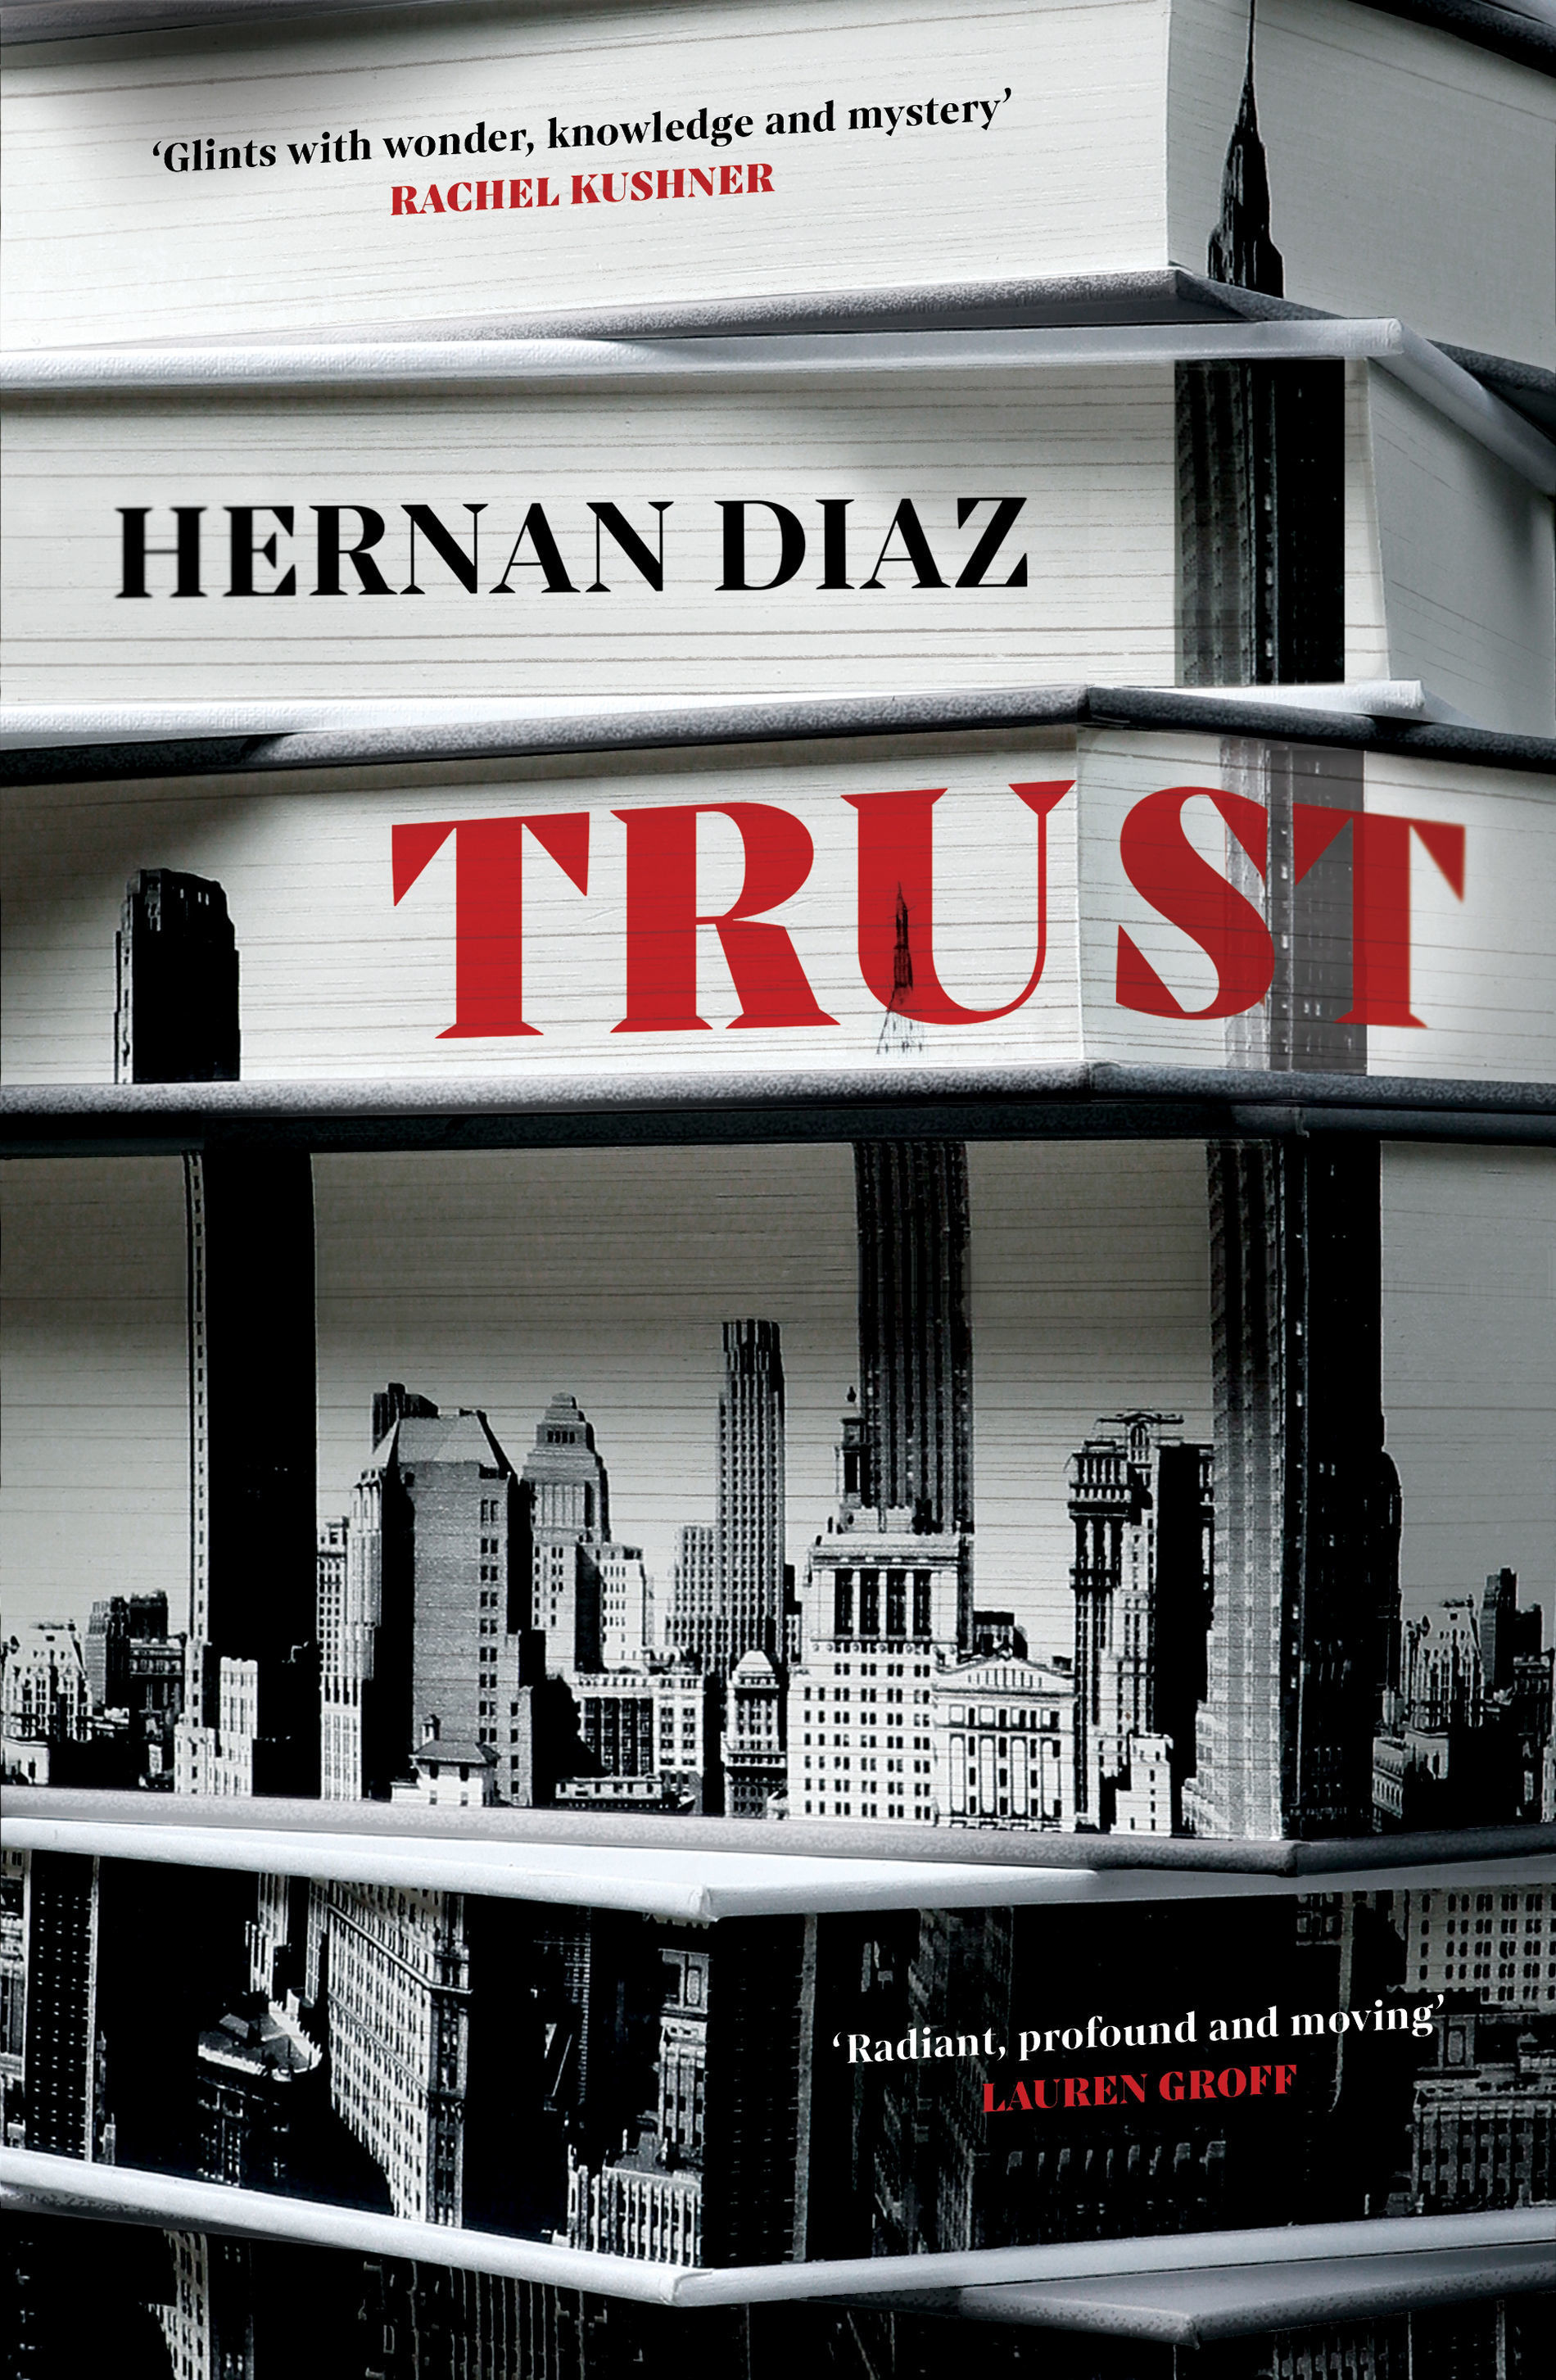 Books: Hernan Diaz's latest book has been longlisted for this year's Booker Prize...